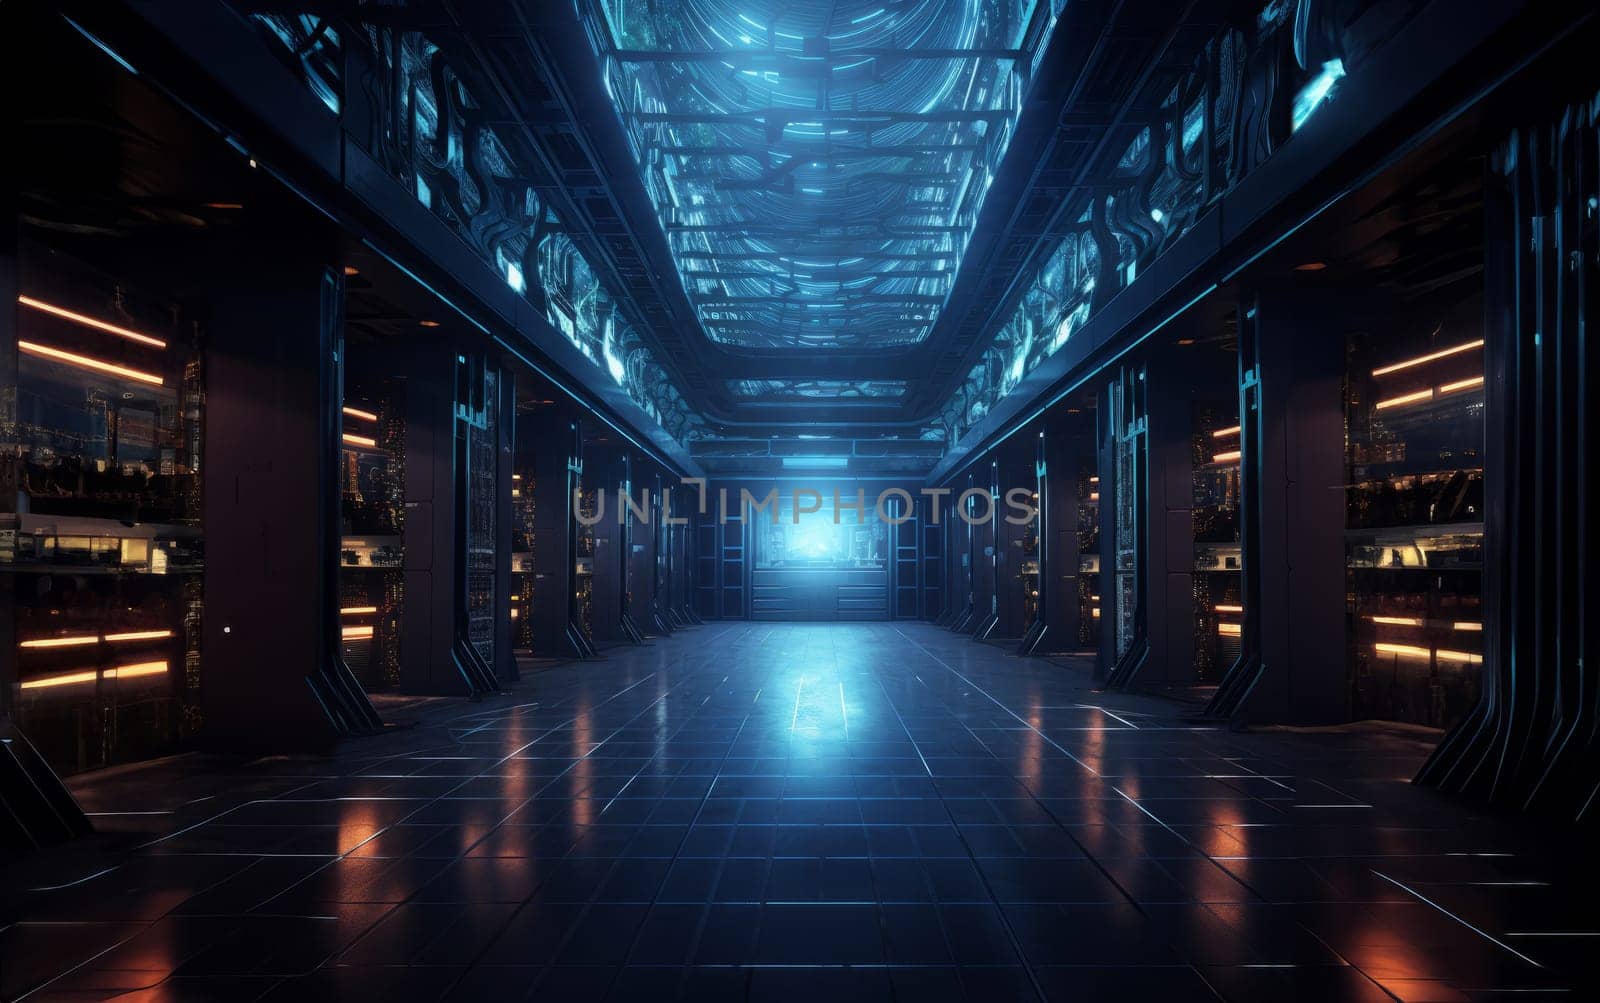 A modern server room, where data is stored and processed to power the digital world.